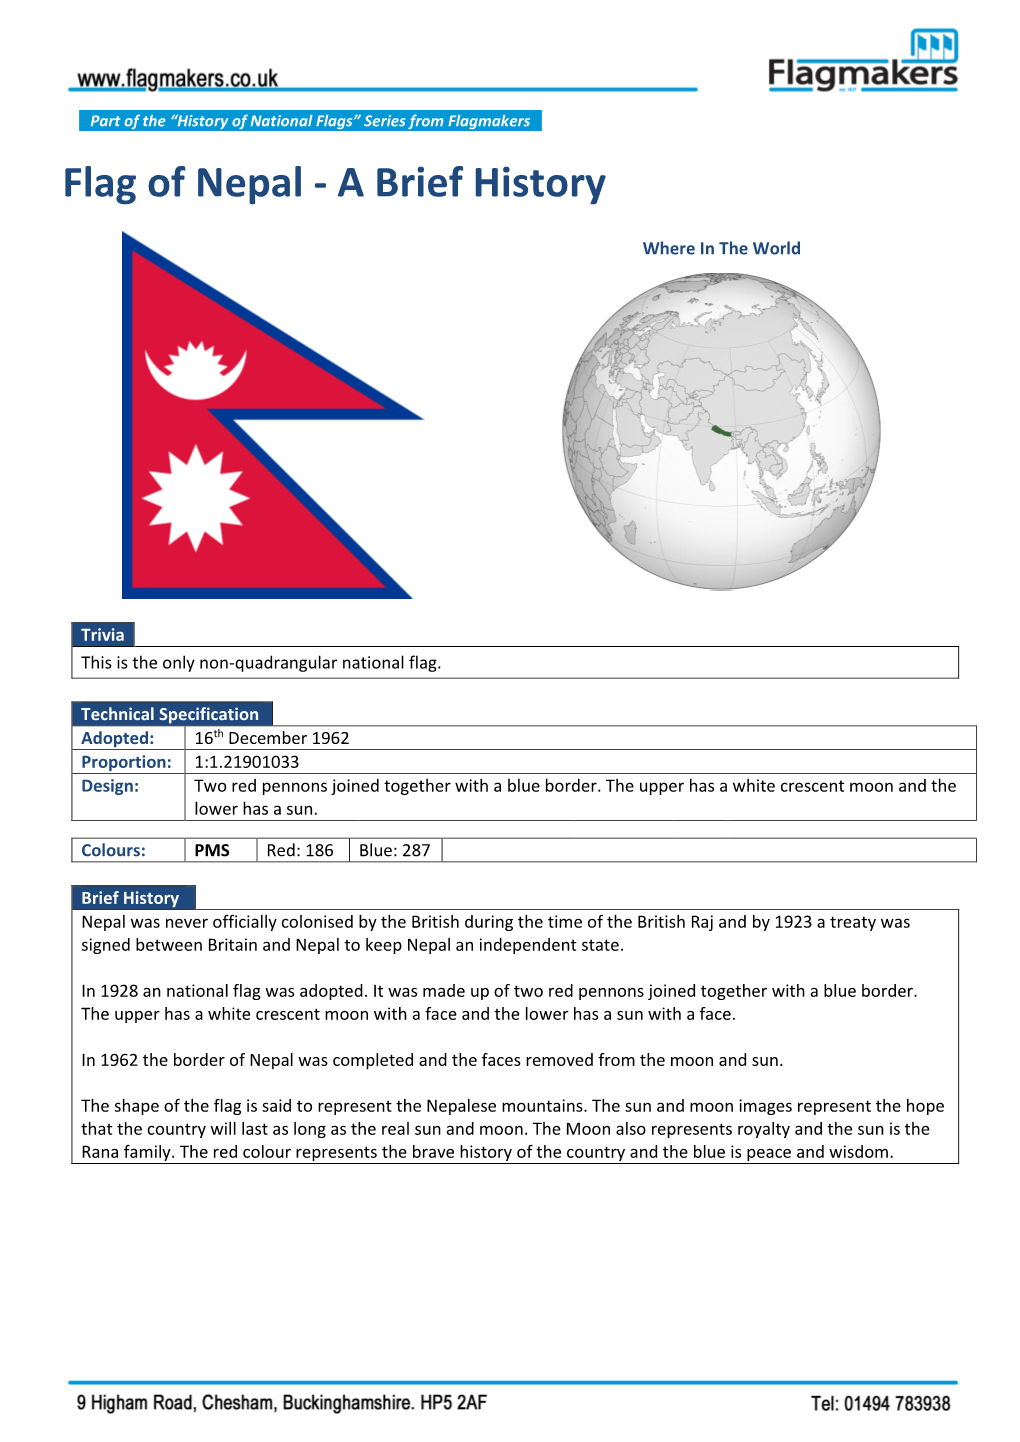 Flag of Nepal - a Brief History